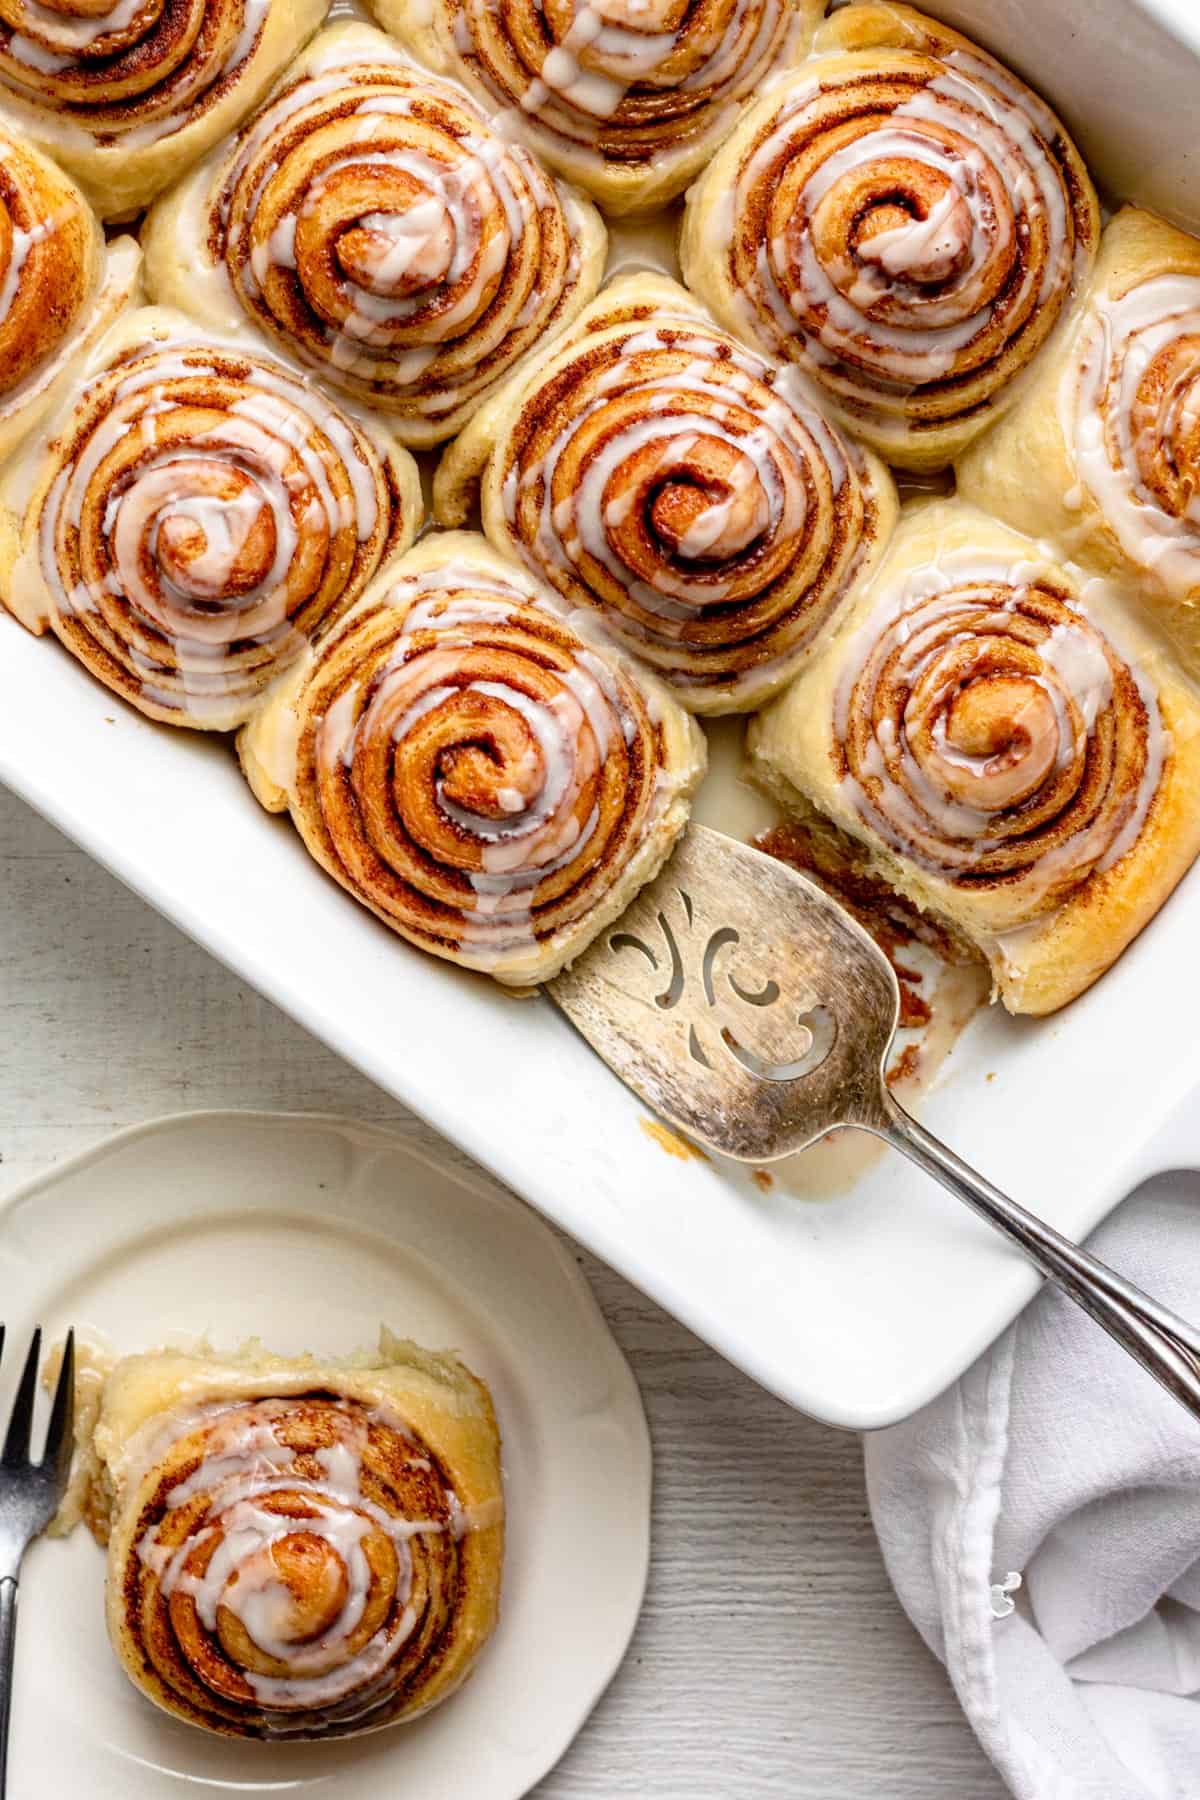 Large pan of 12 cinnamon rolls at an angle and one roll served on small dessert plate nearby